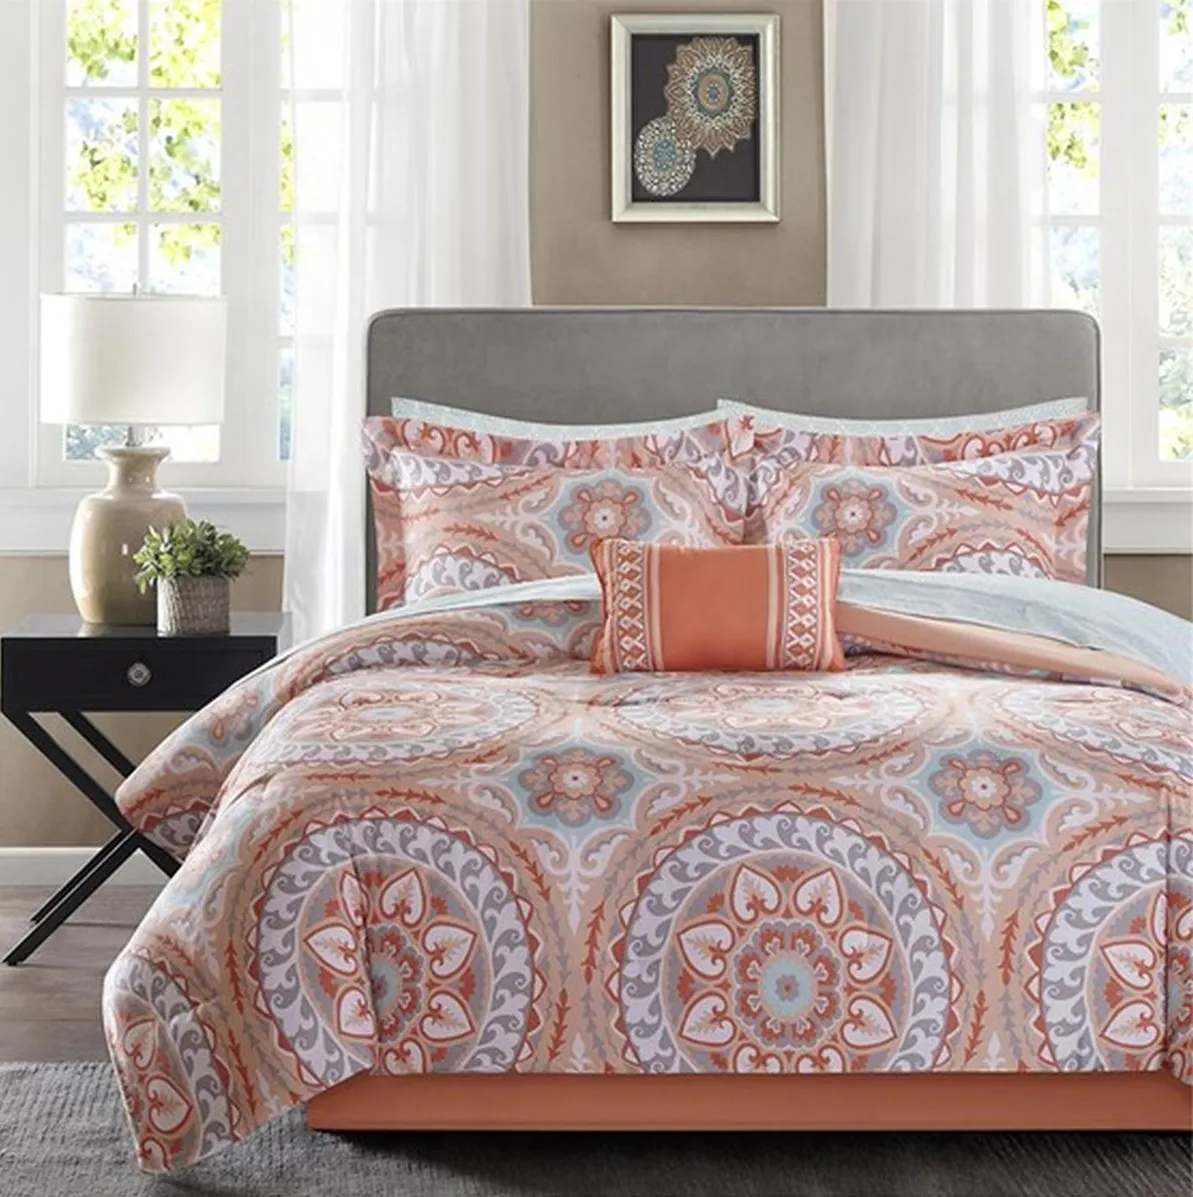 Olliix by Madison Park Essentials Coral California King Serenity Complete Comforter and Cotton Sheet Set